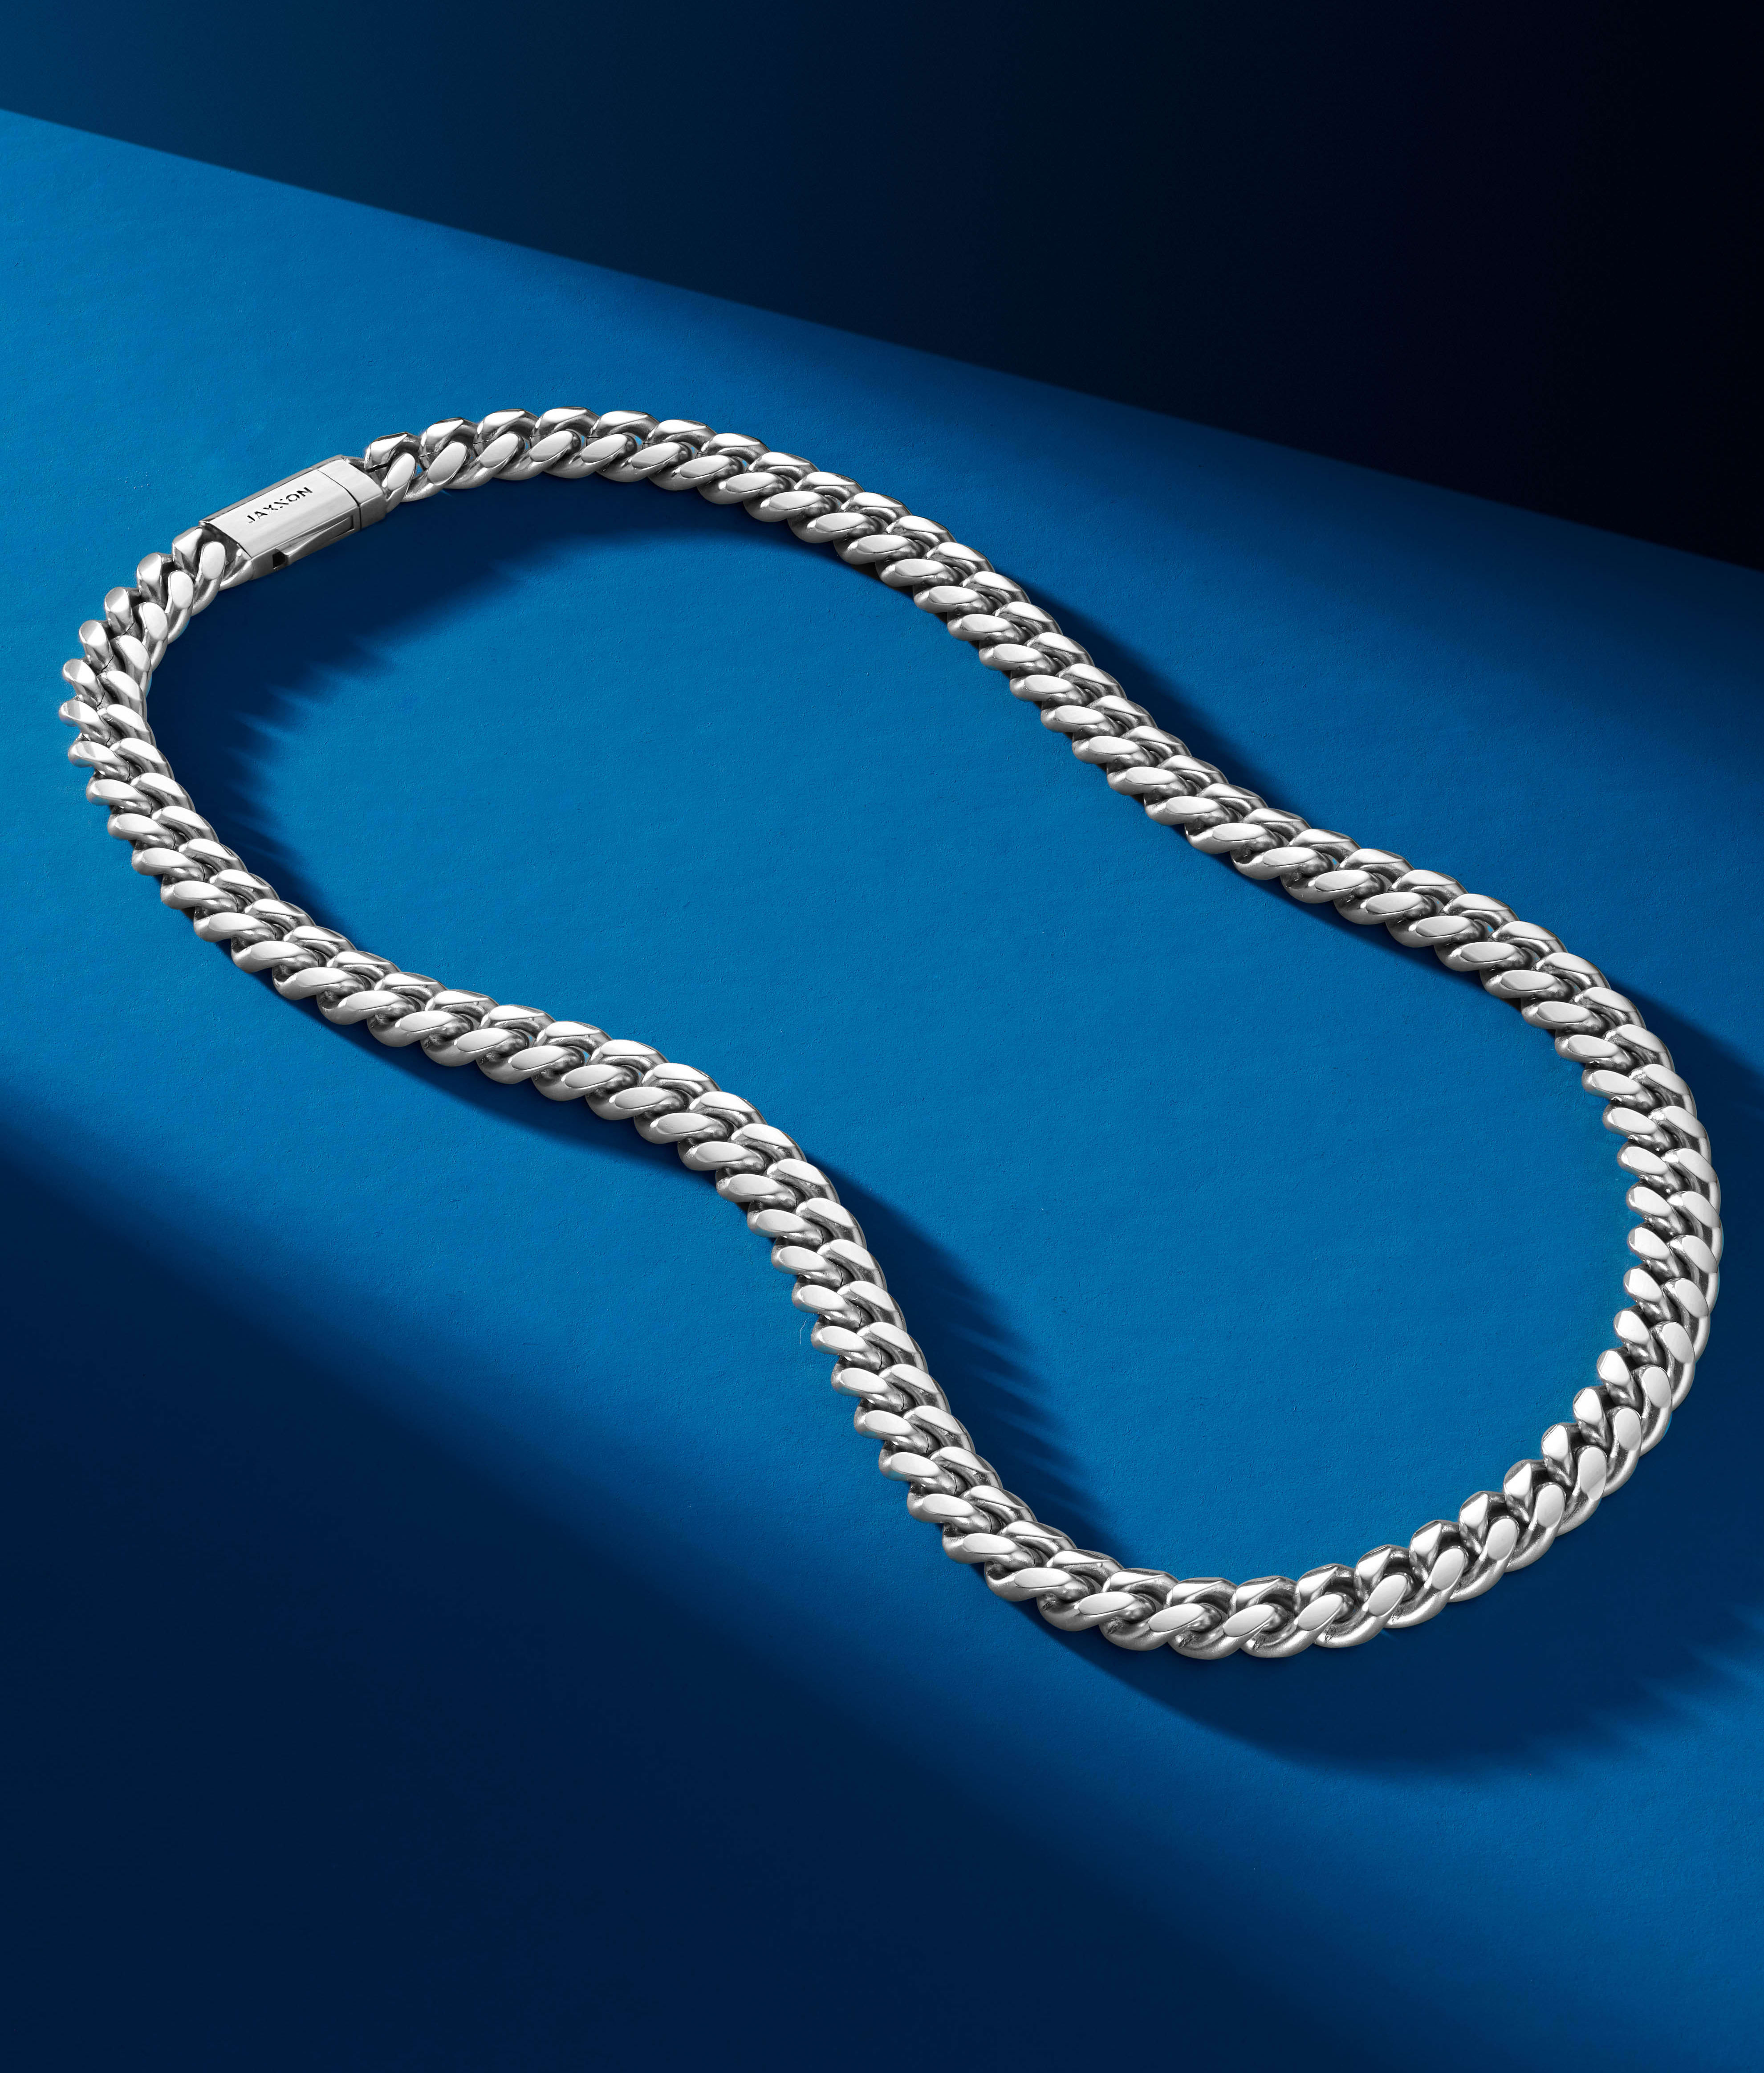 Image Cuban Link Chain - 10mm Silver - Higher Quality Standards